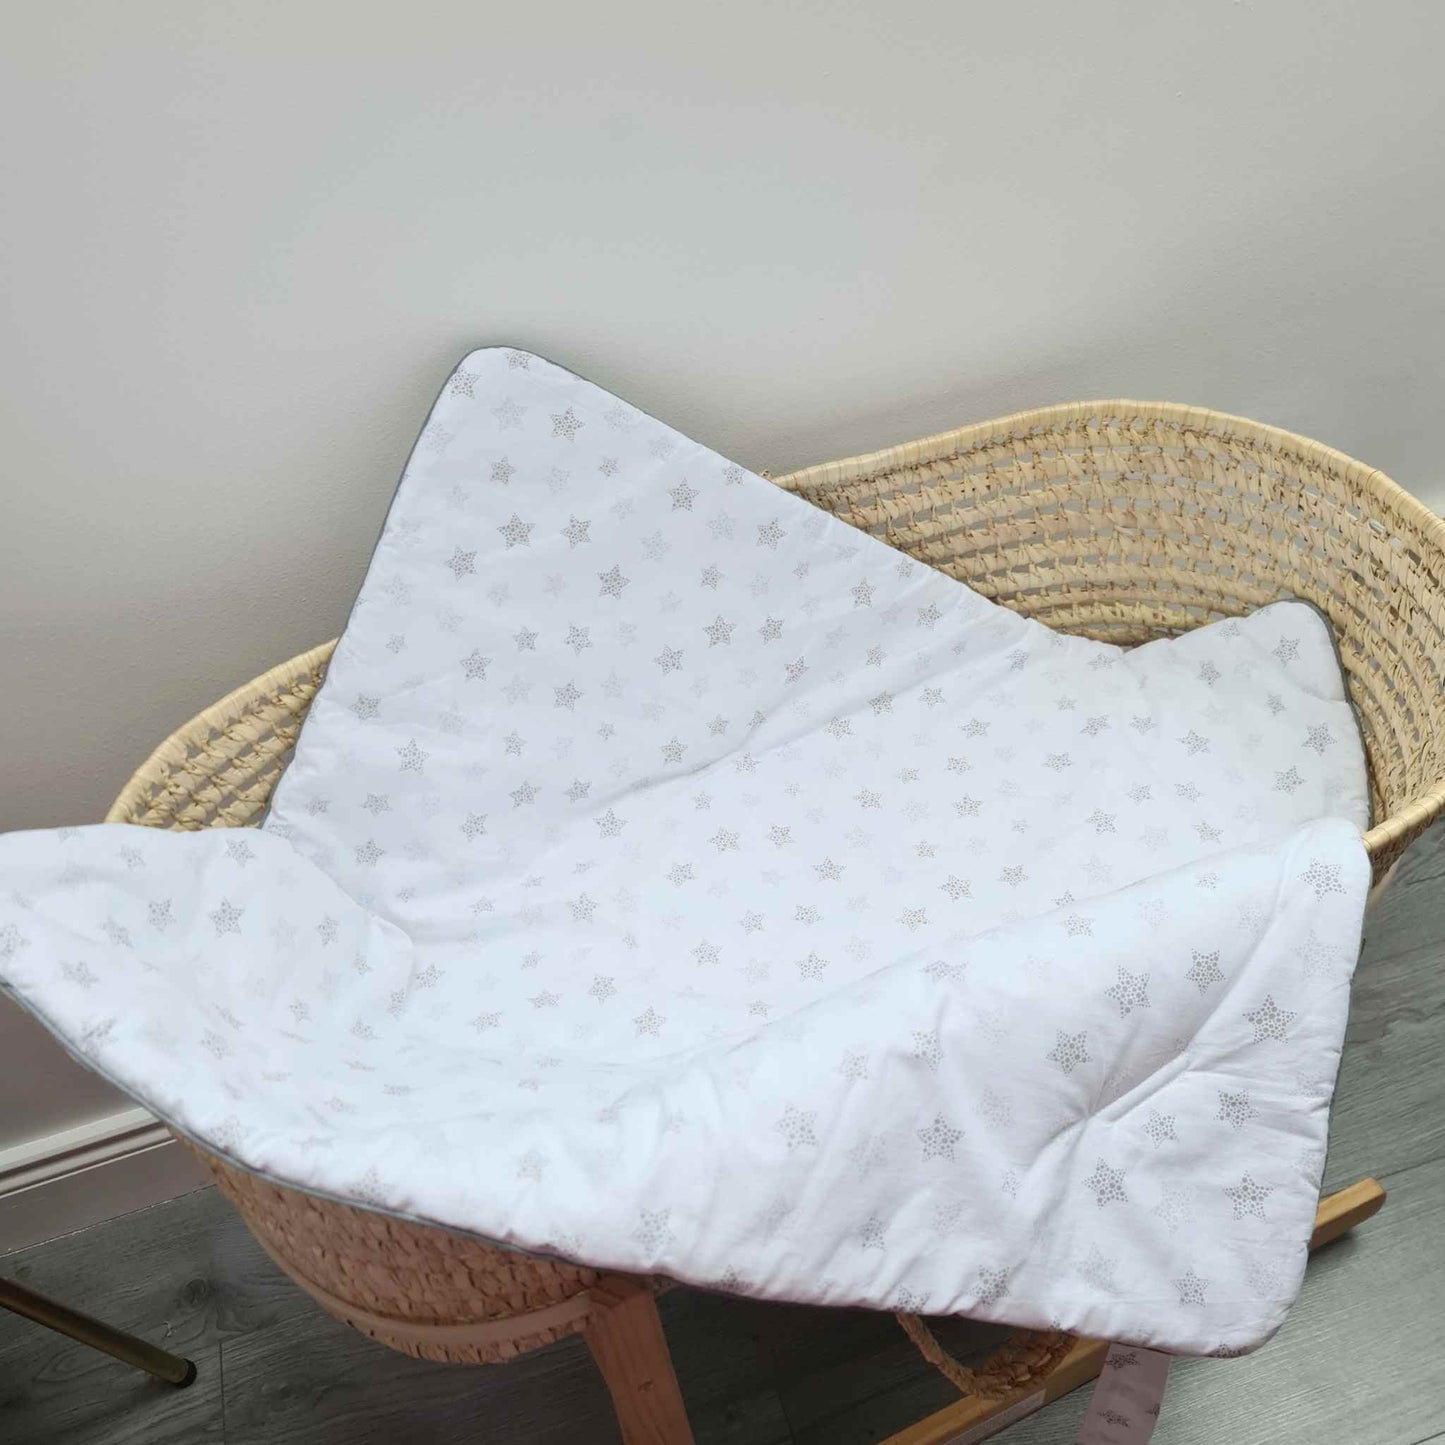 quilt blanket for moses basket carry cot warm white with stars pattern 100% cotton